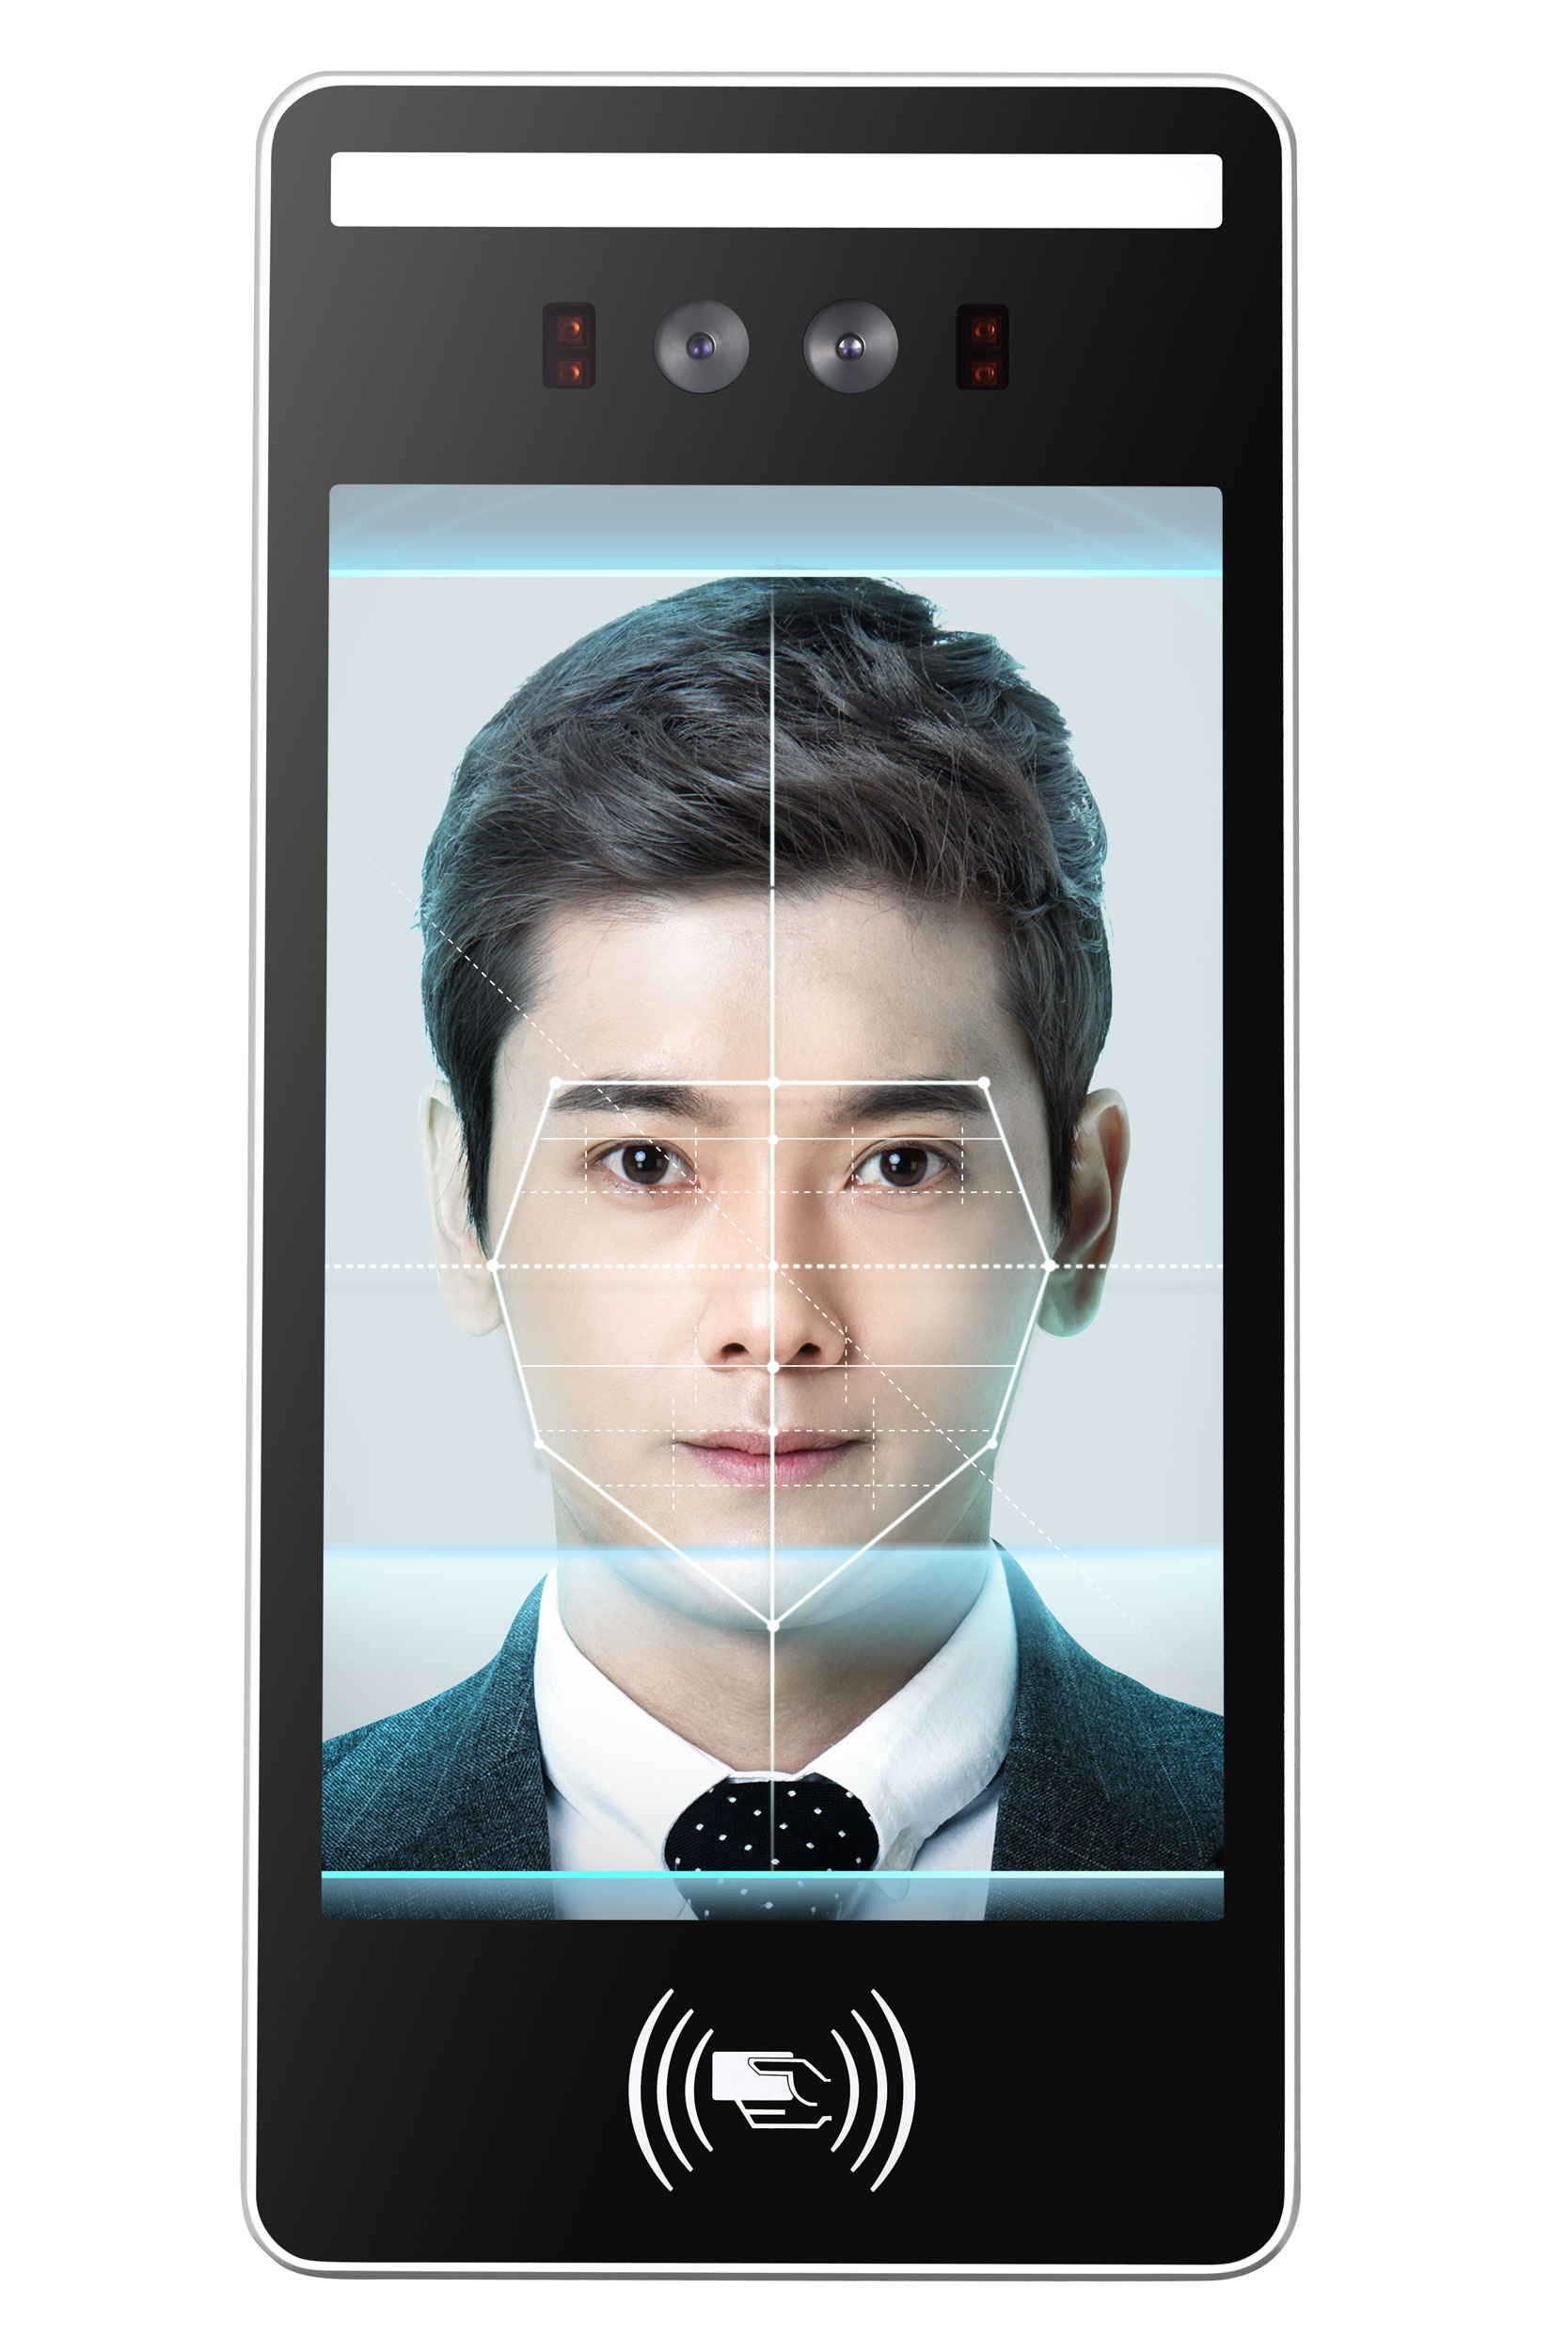 China’s hotel facial recognition check-ins and AI smart rooms are here ...